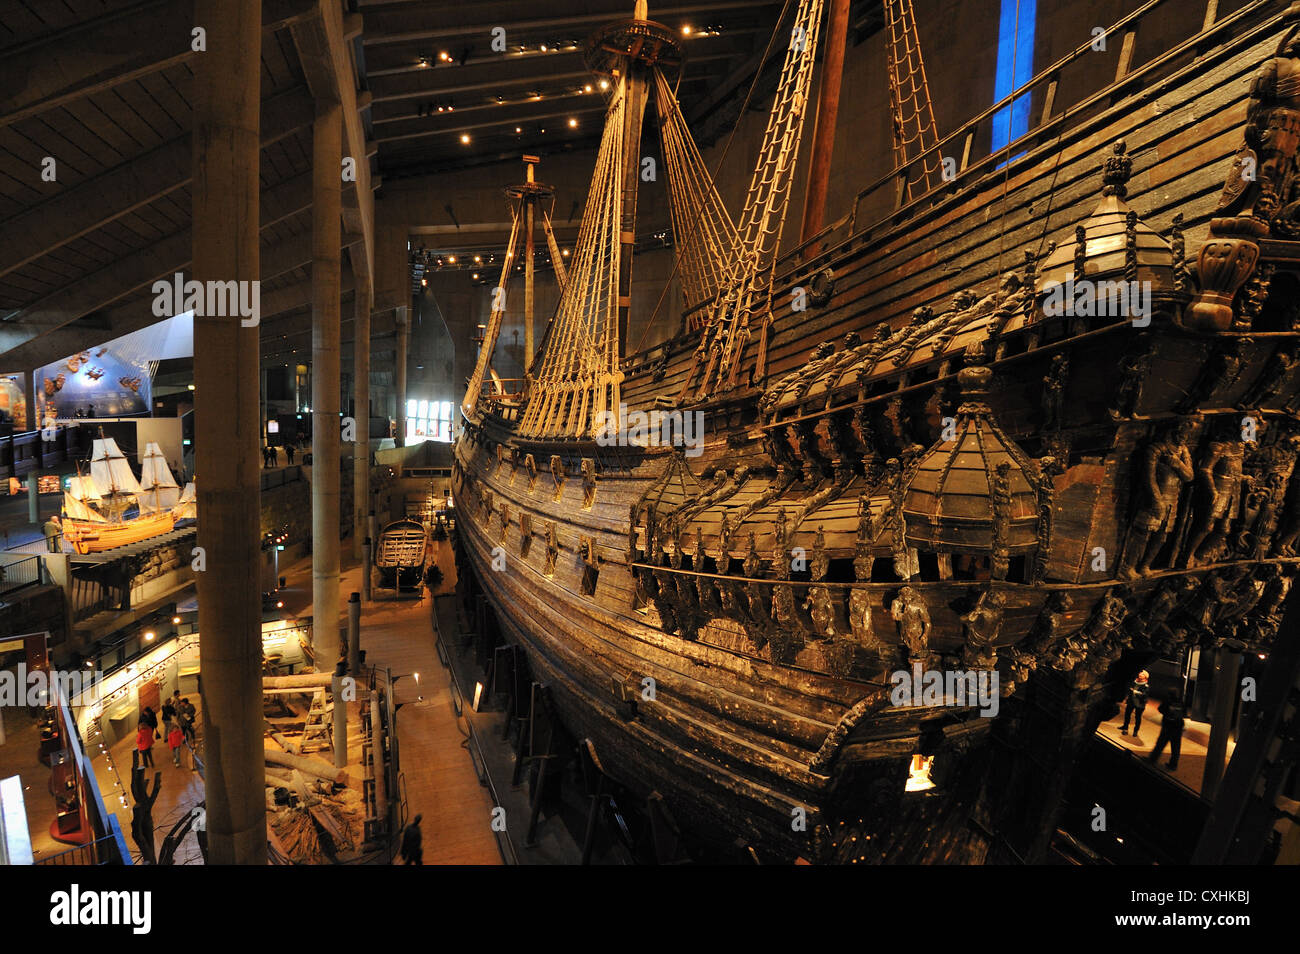 View to the model and the original preserved warship Vasa at Vasa Museum in Djurgarden Stockholm, Stockholms Lan, Sweden Stock Photo